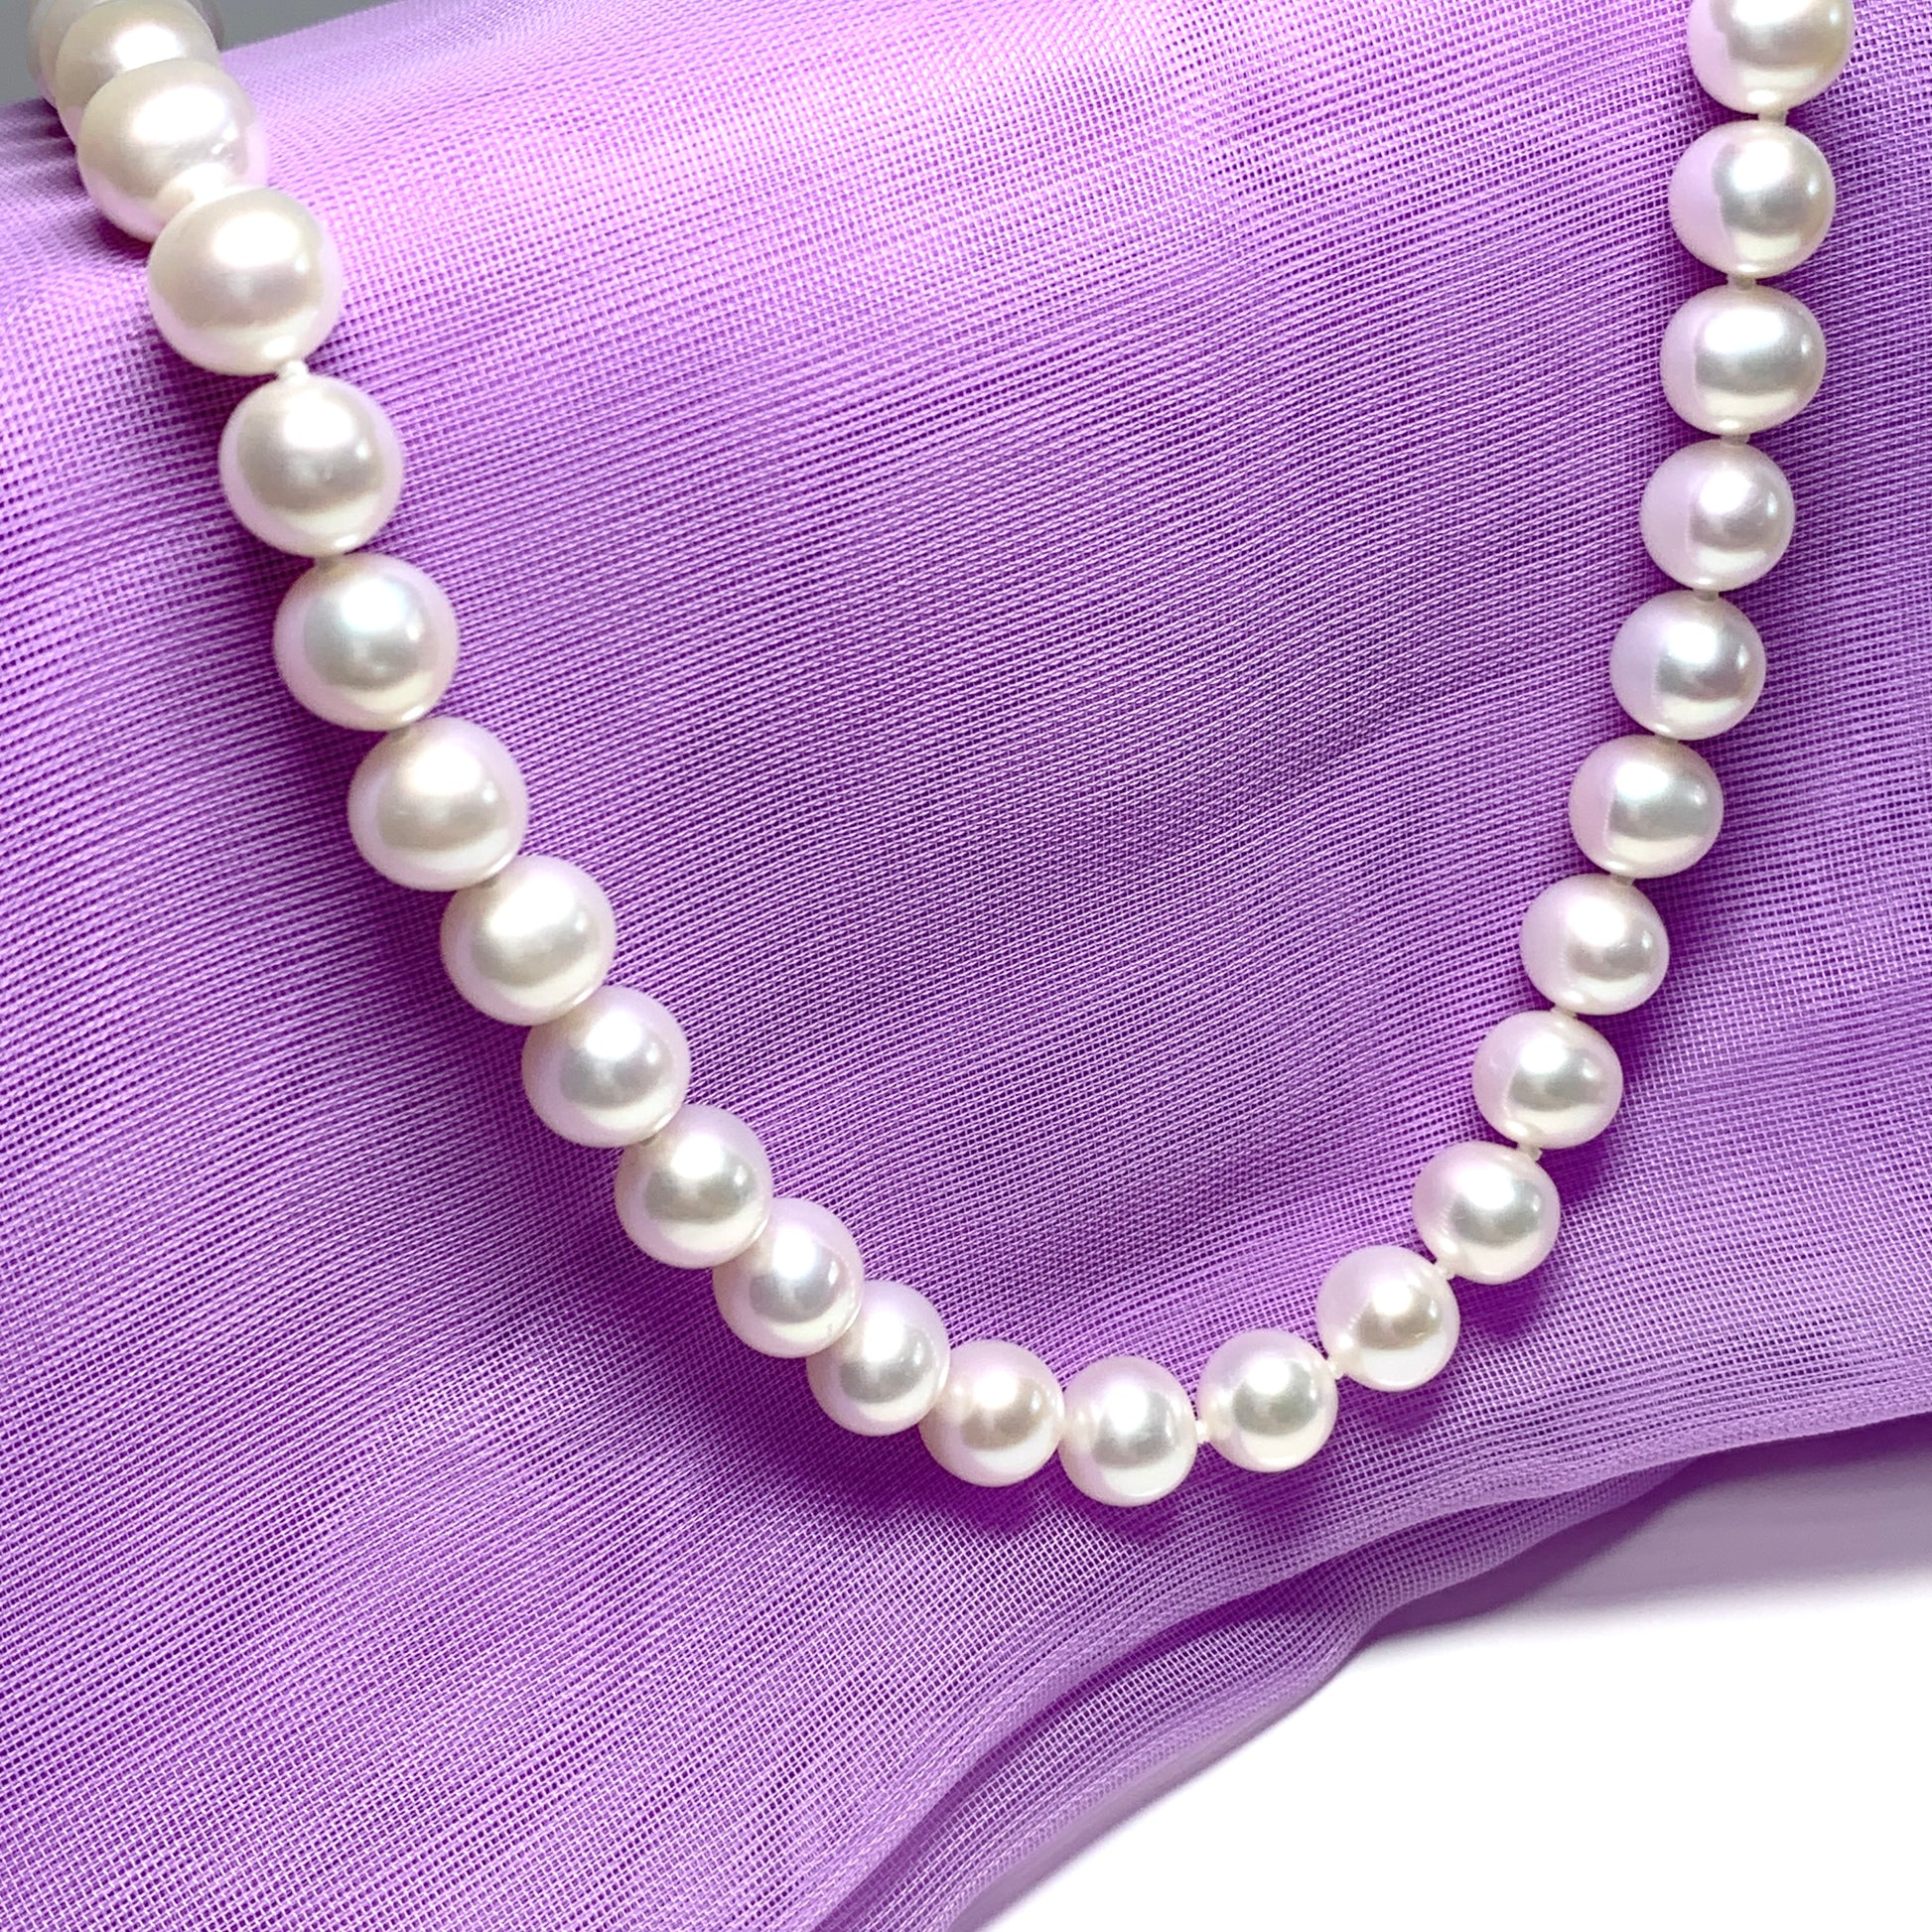 Freshwater cultured pearl single row necklace 9 mm